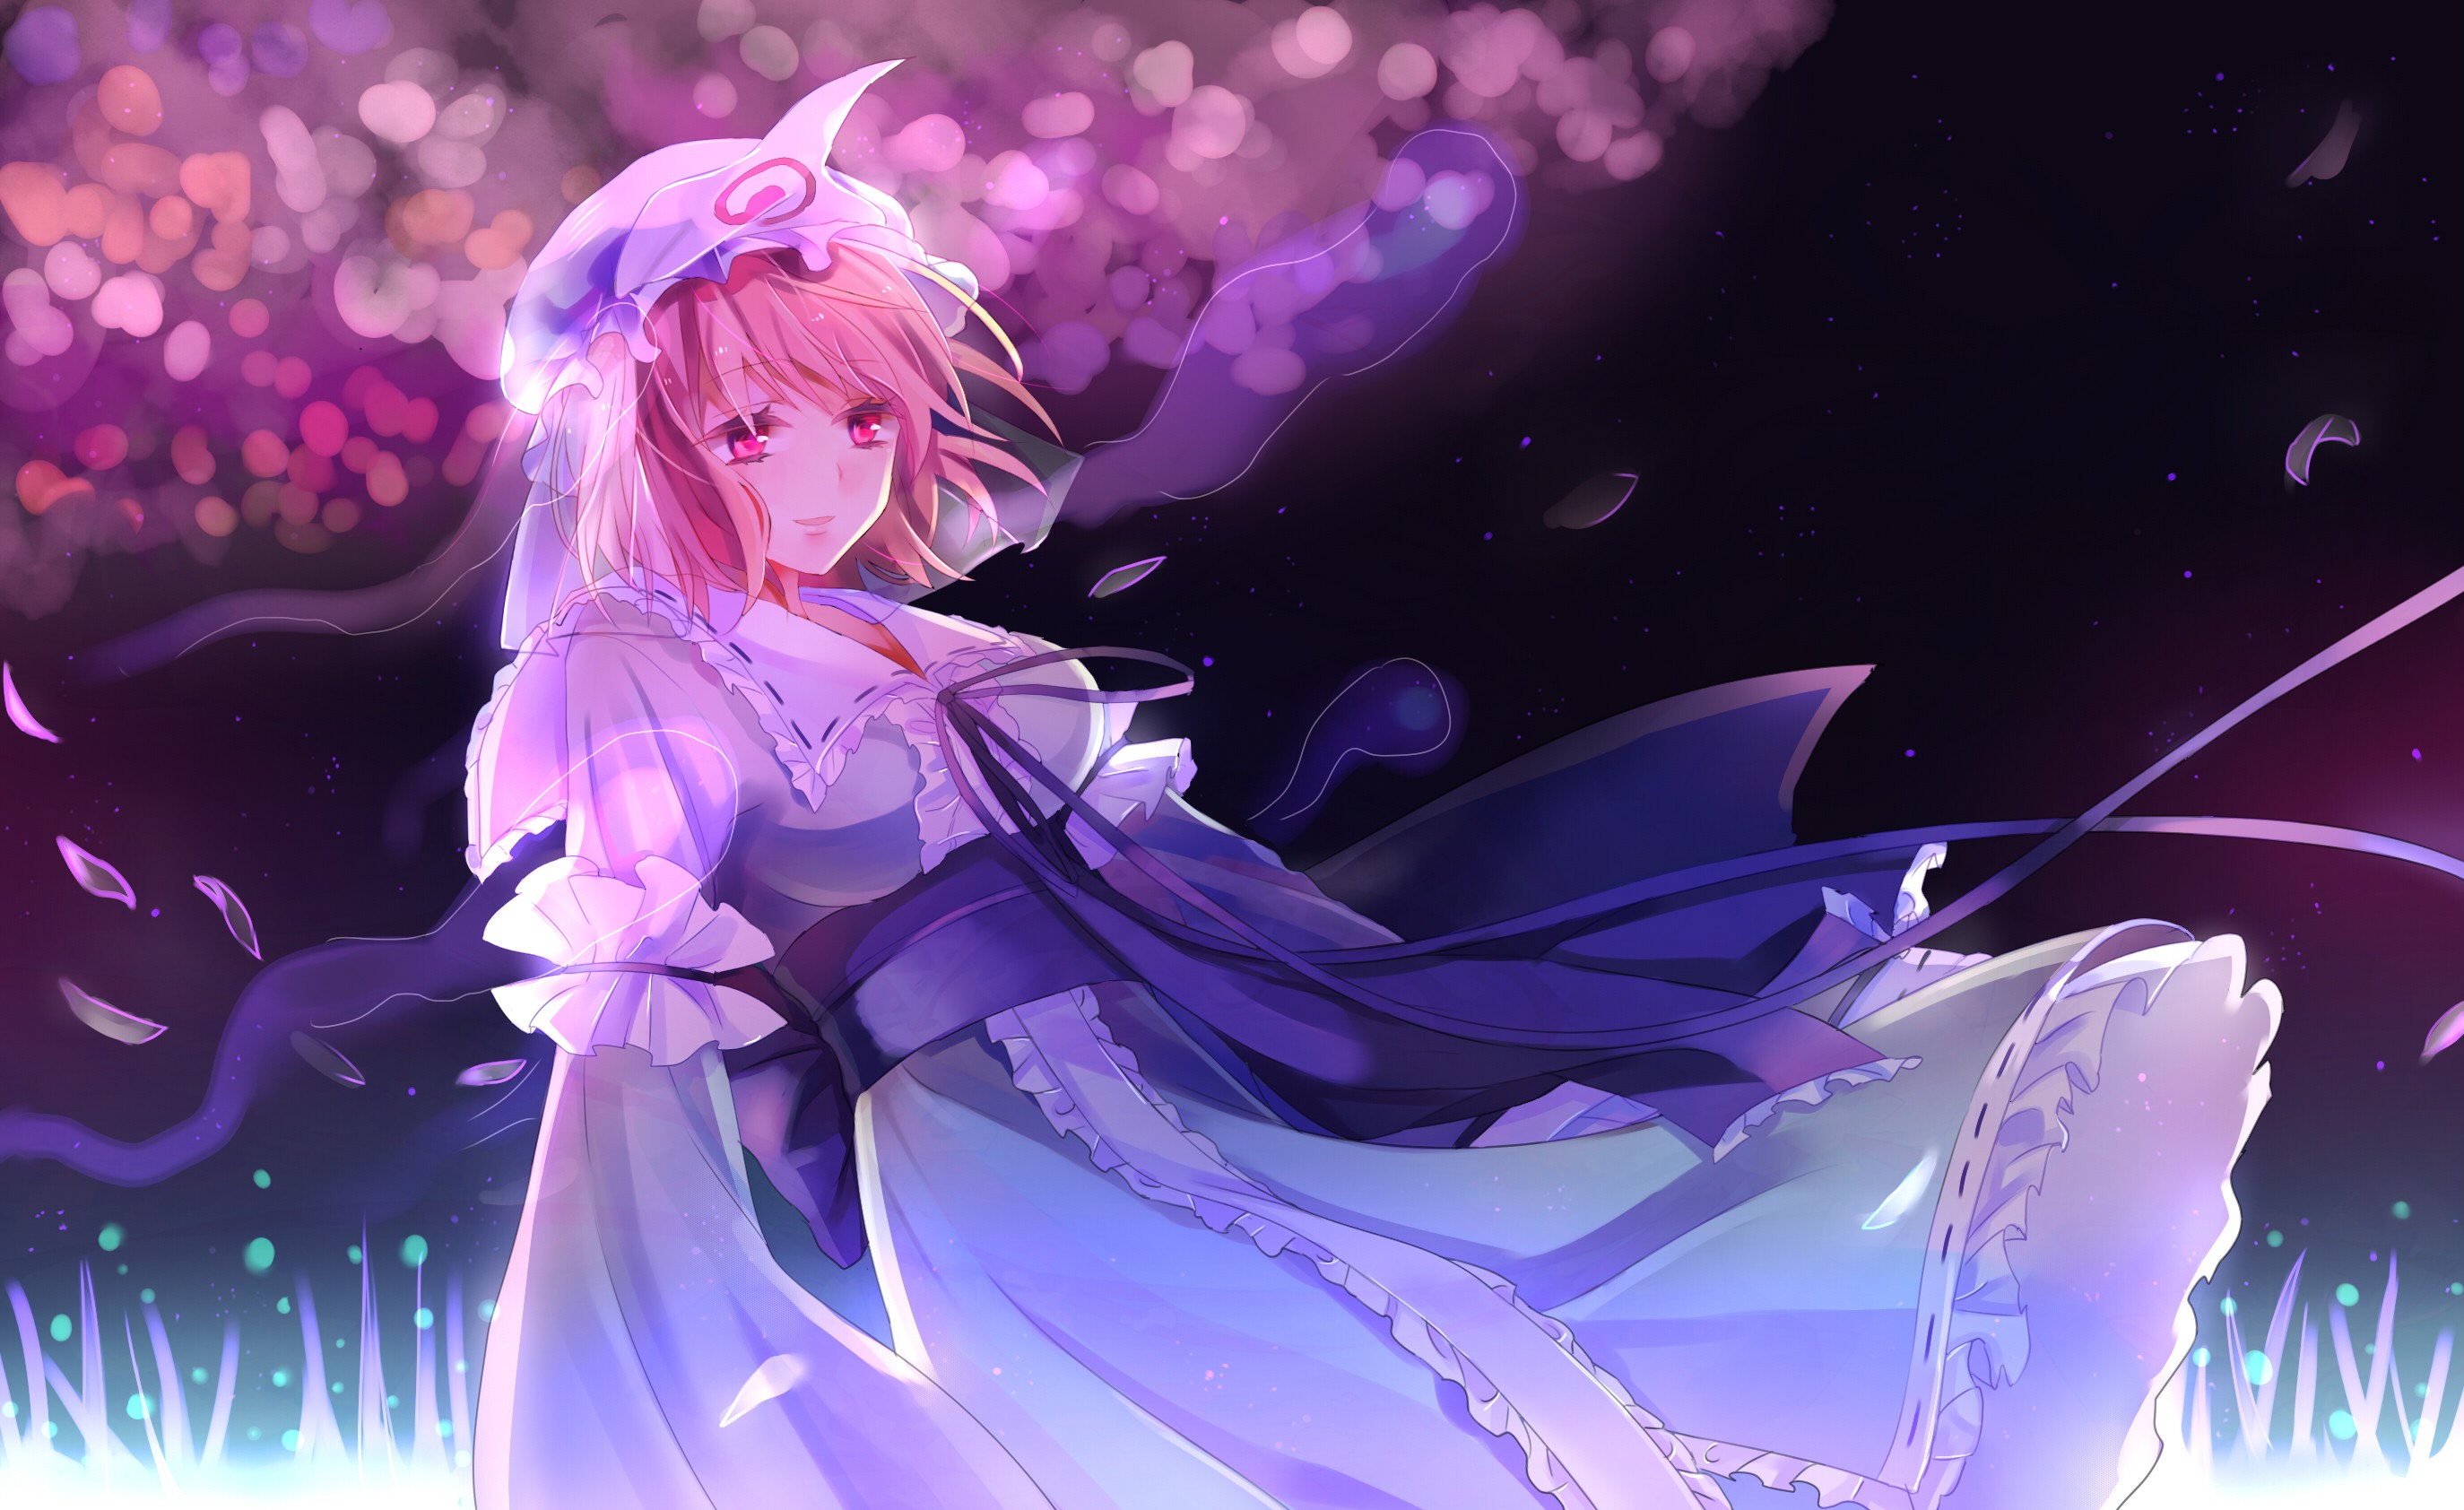 Anime 2748x1684 Touhou Saigyouji Yuyuko fantasy art Pixiv anime girls pink eyes hair blowing in the wind petals pink hair looking away parted lips dress frills anime long sleeves backlighting Japanese clothes leaves stars night sky grass sash hat